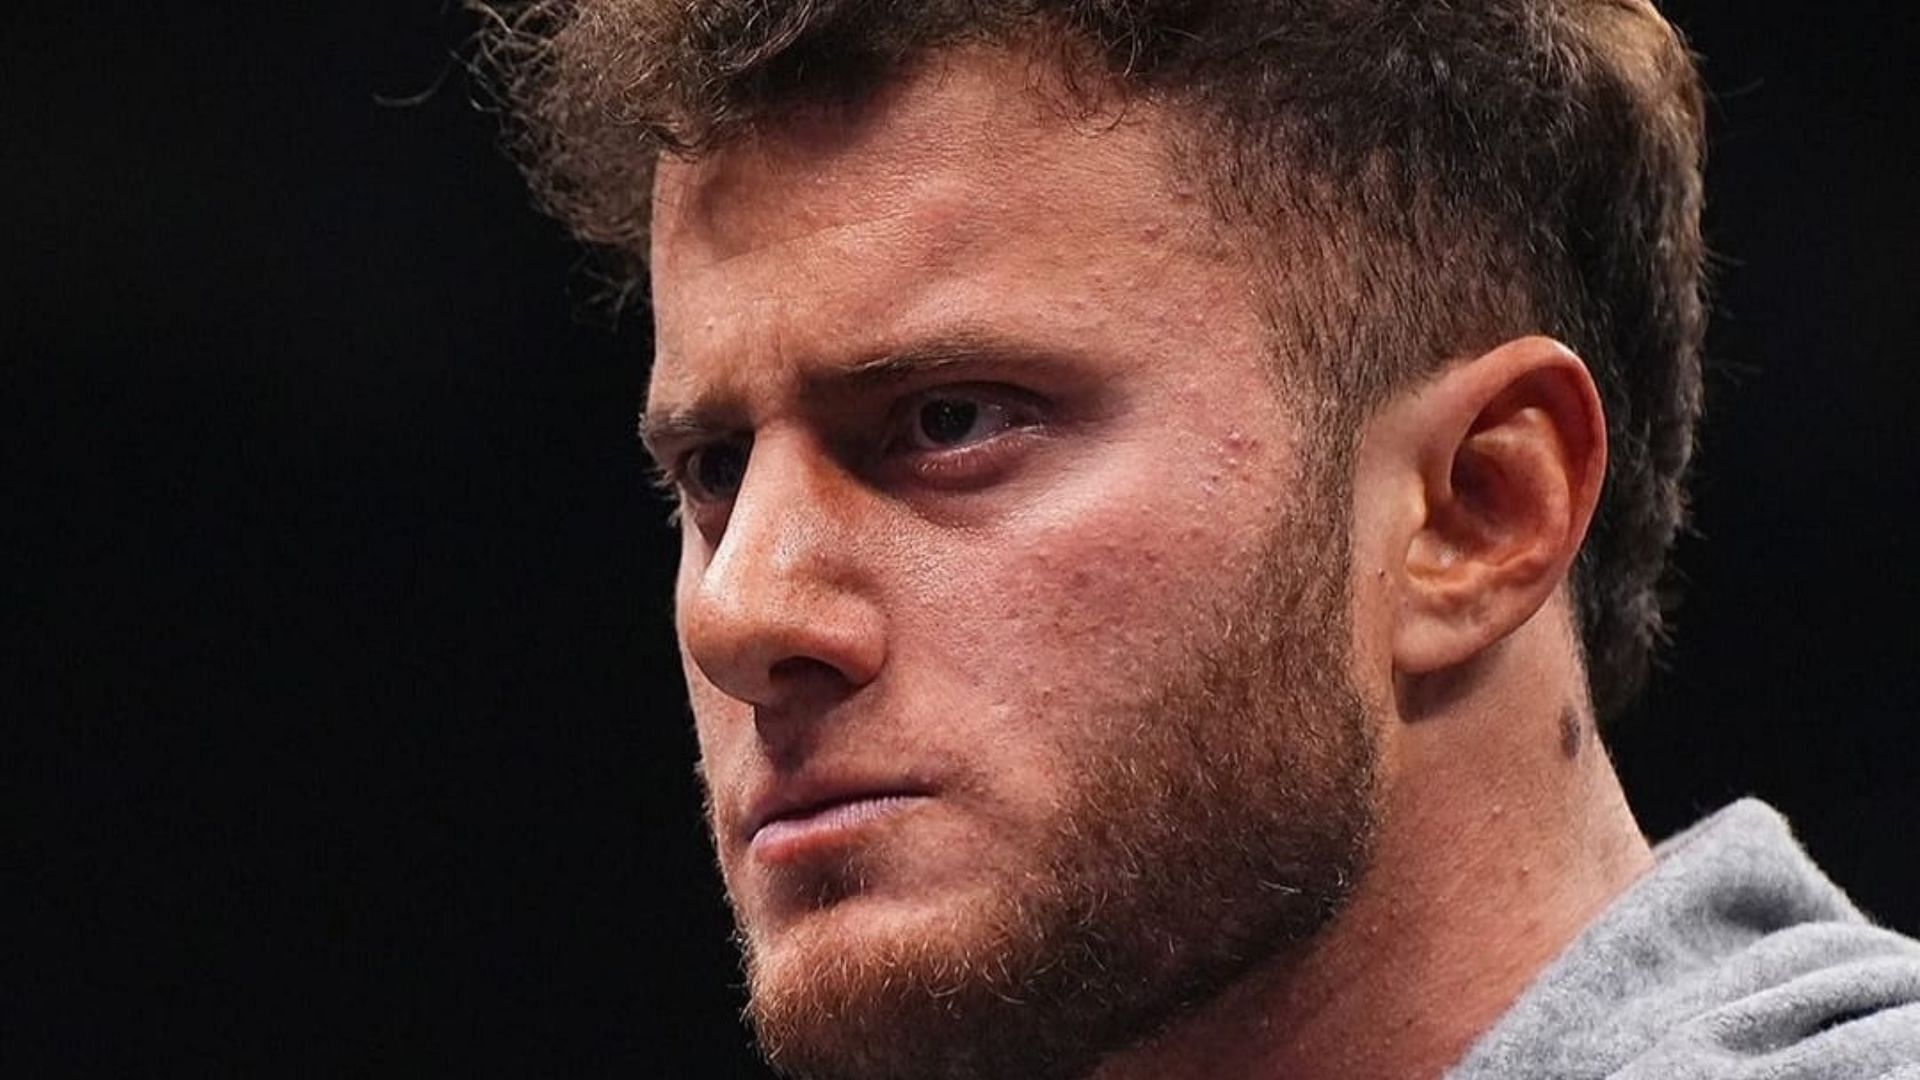 MJF is one of the biggest names in wrestling today.